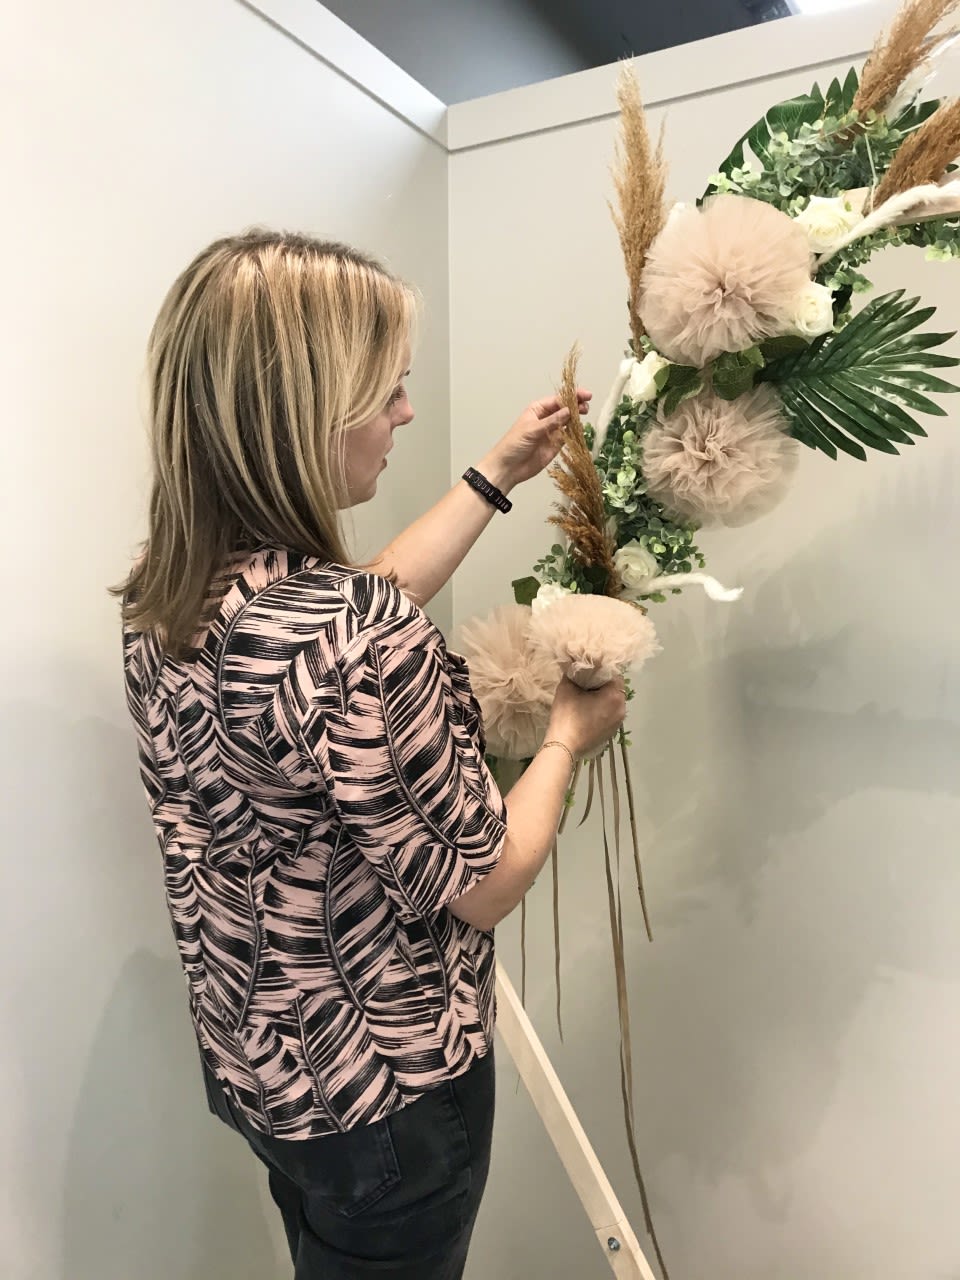 A photo of Sarah Manning standing and fixing together a floral arrangement.